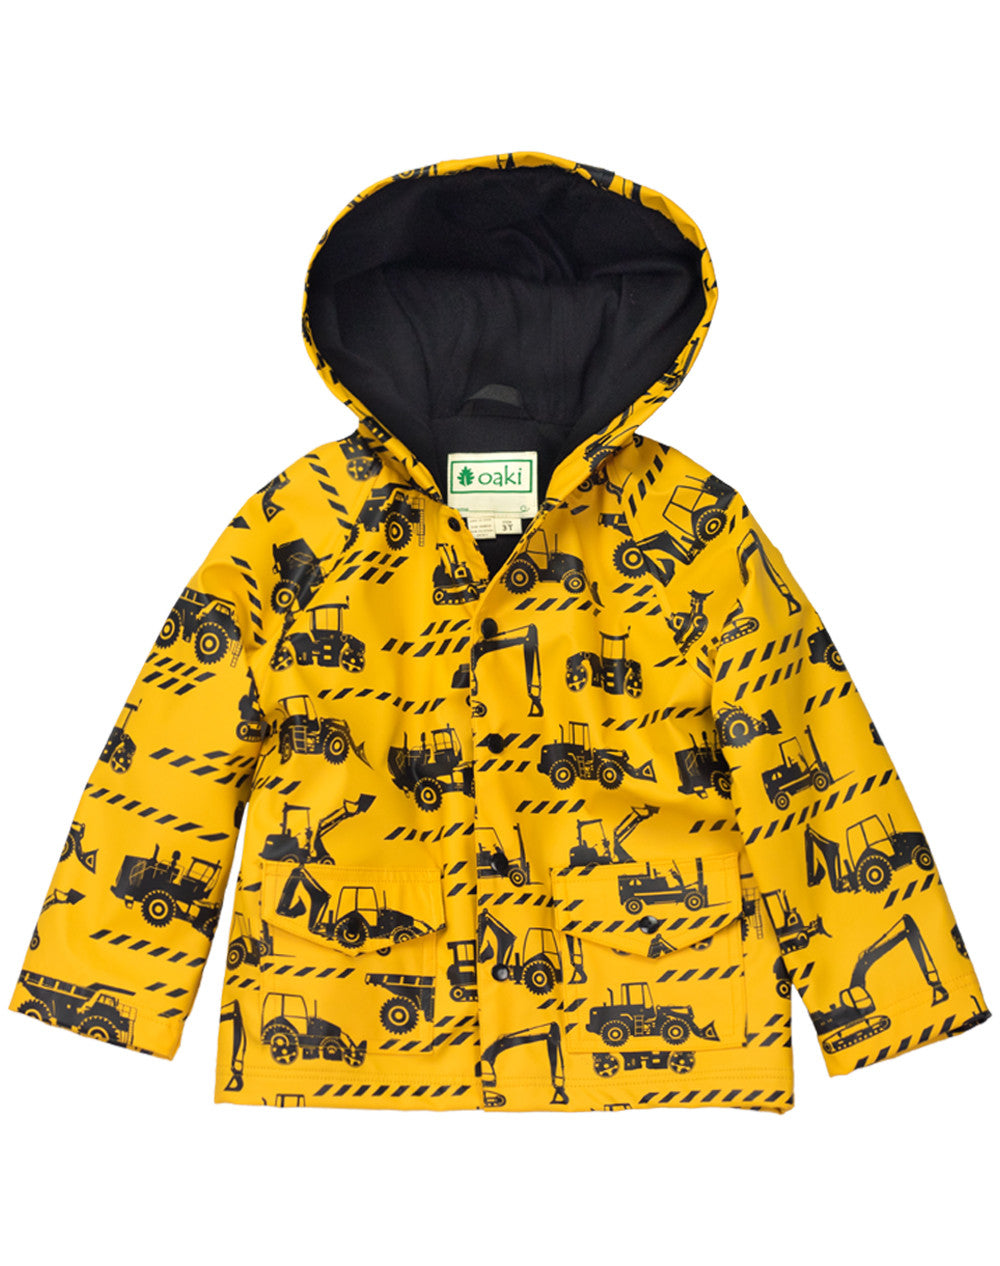 CLEARANCE: Construction Vehicles Lined Rain Jacket size 10/11